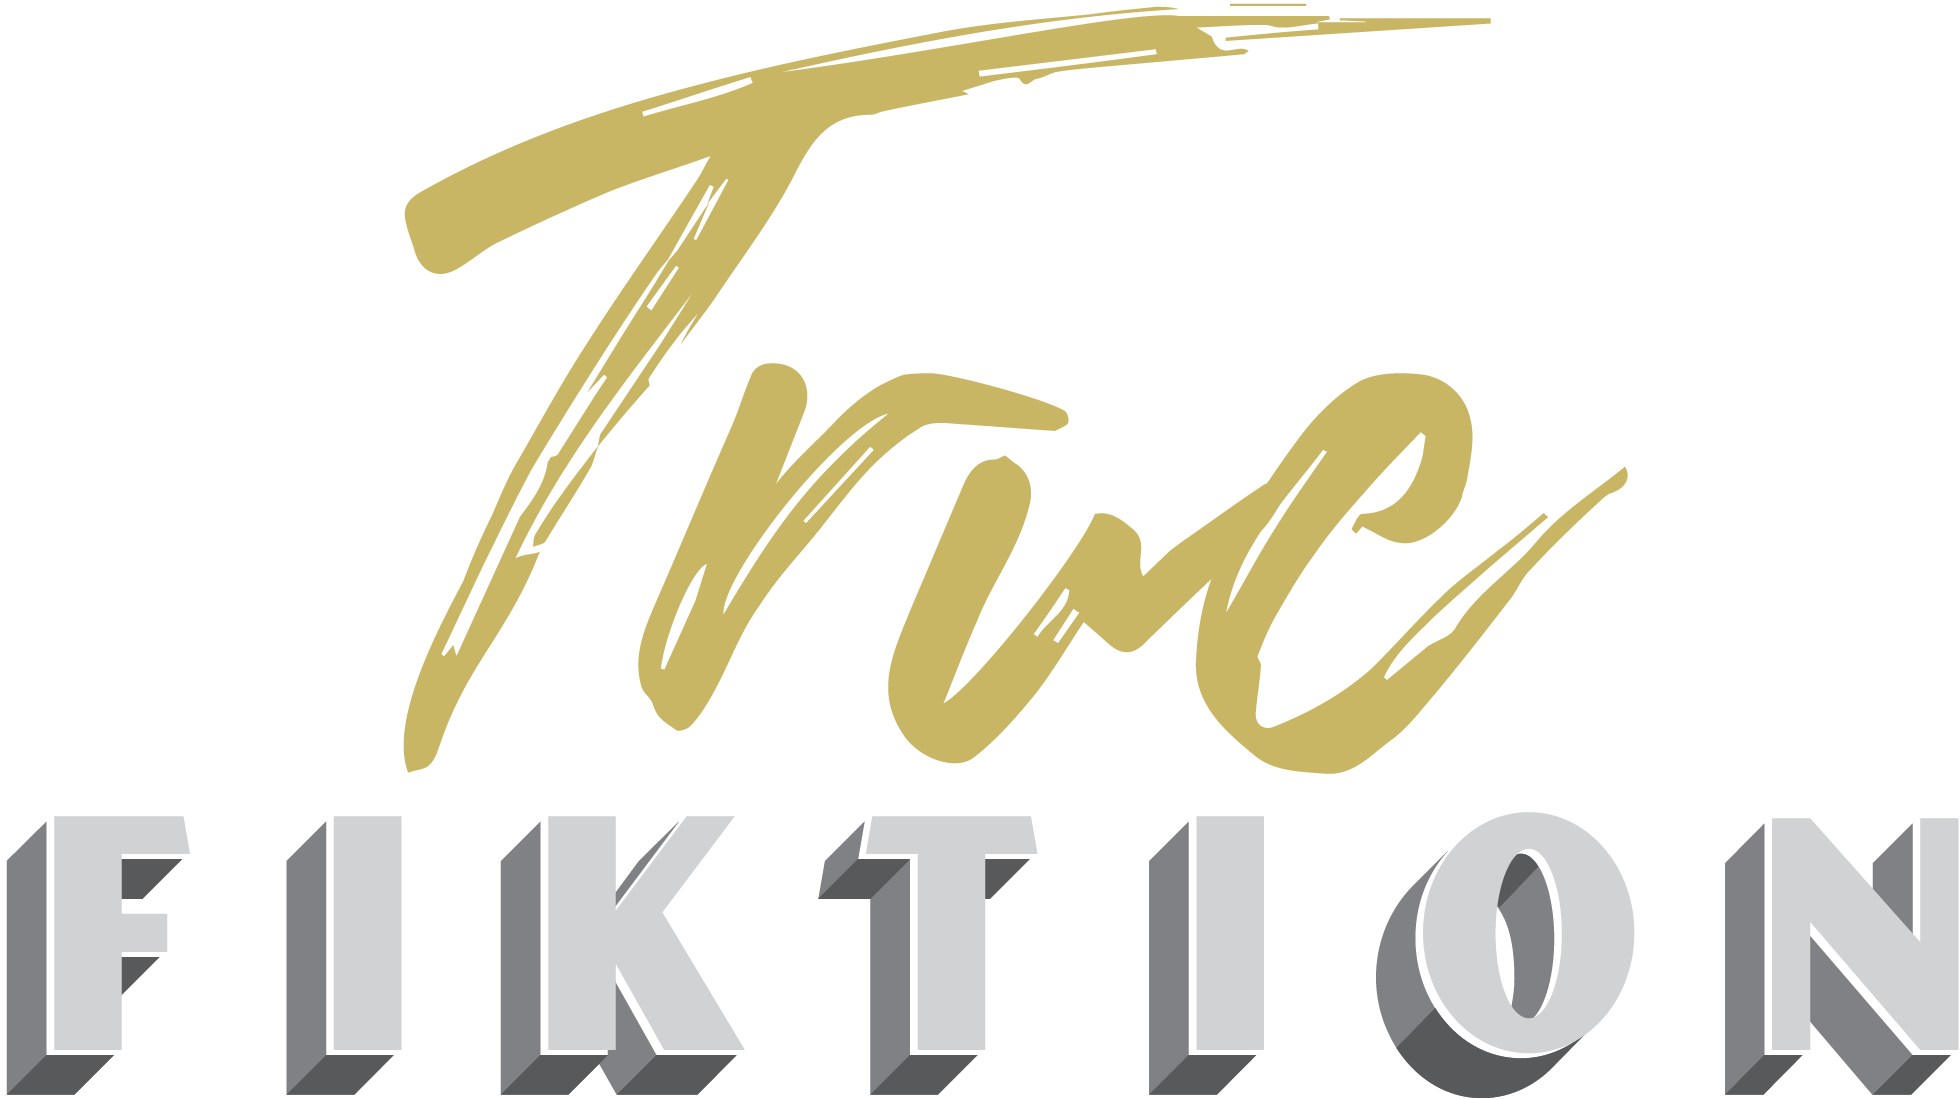 True Fiktion logo in gold and silver